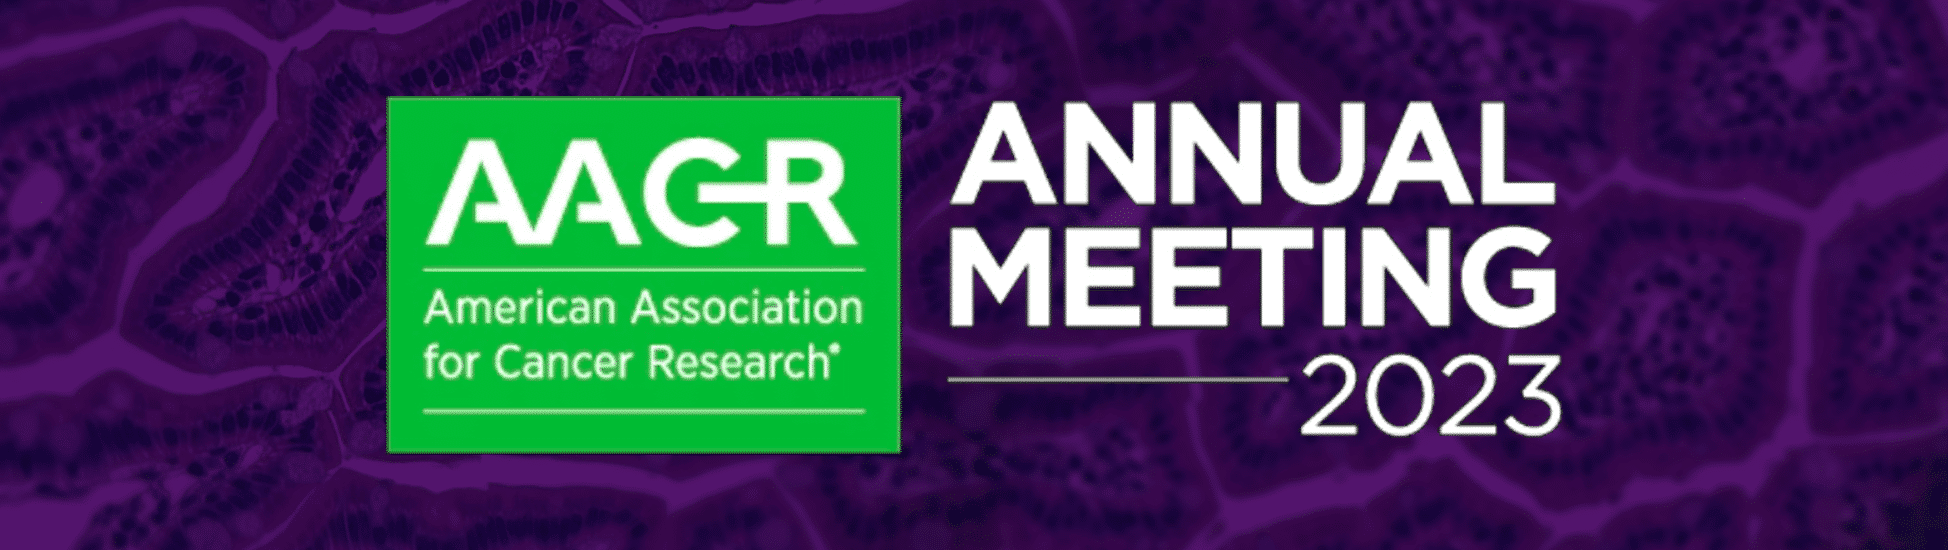 cancer research annual report 2023